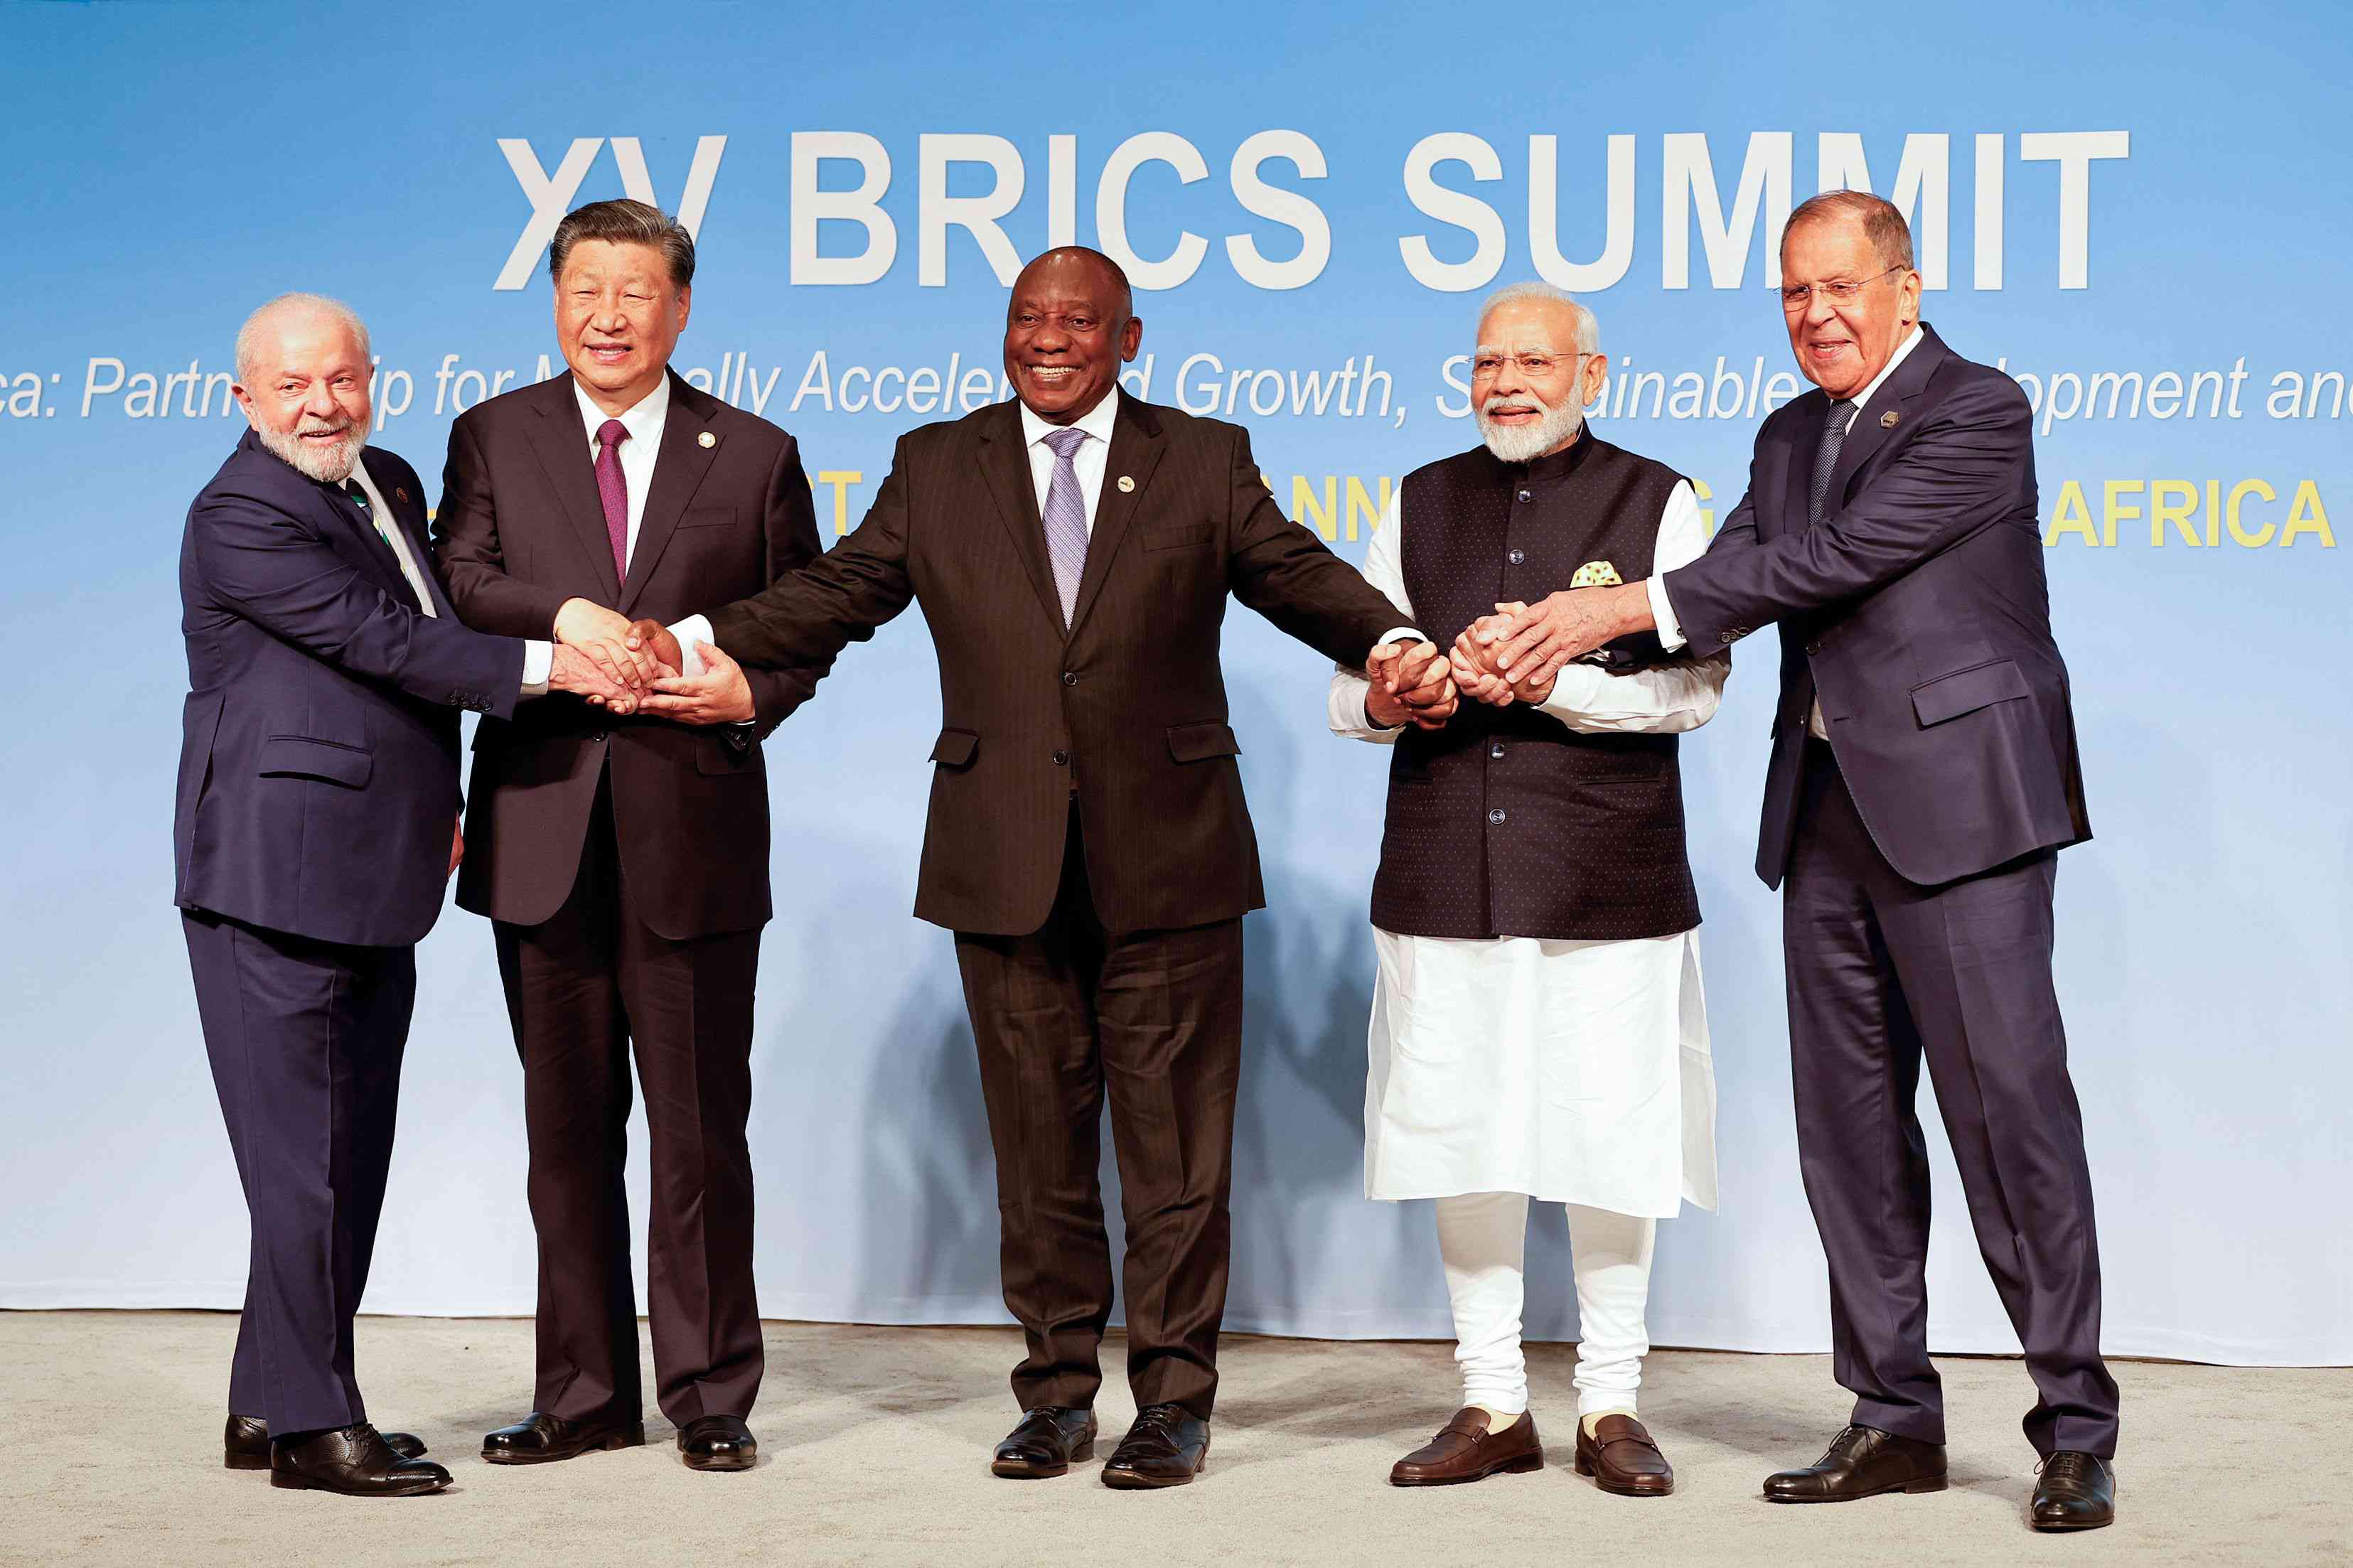 Presidents of the five BRICS nations at a summit